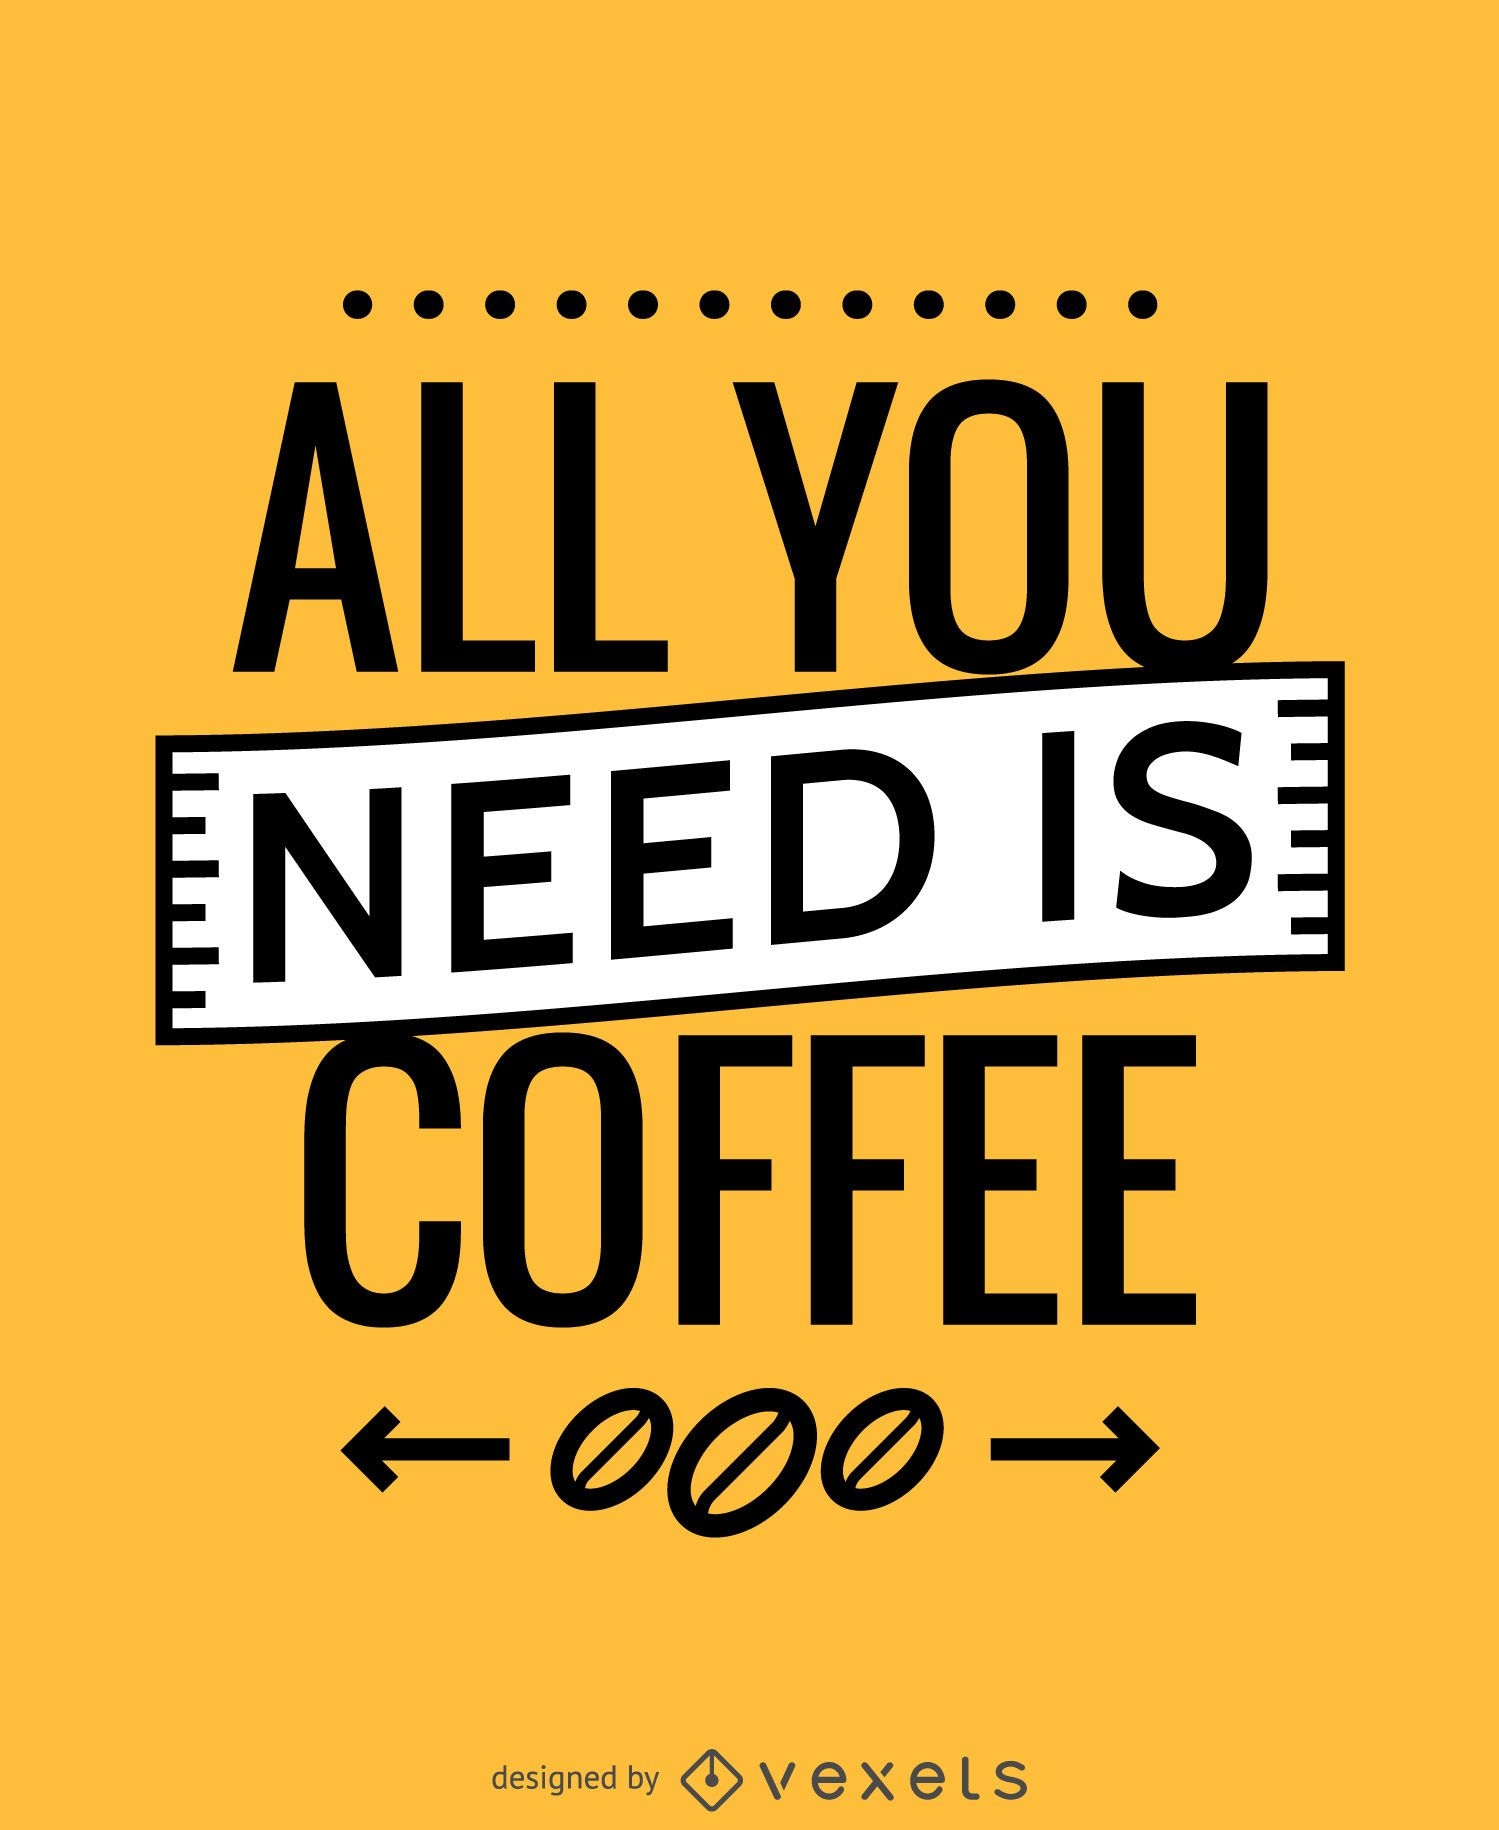 All you need is coffee poster